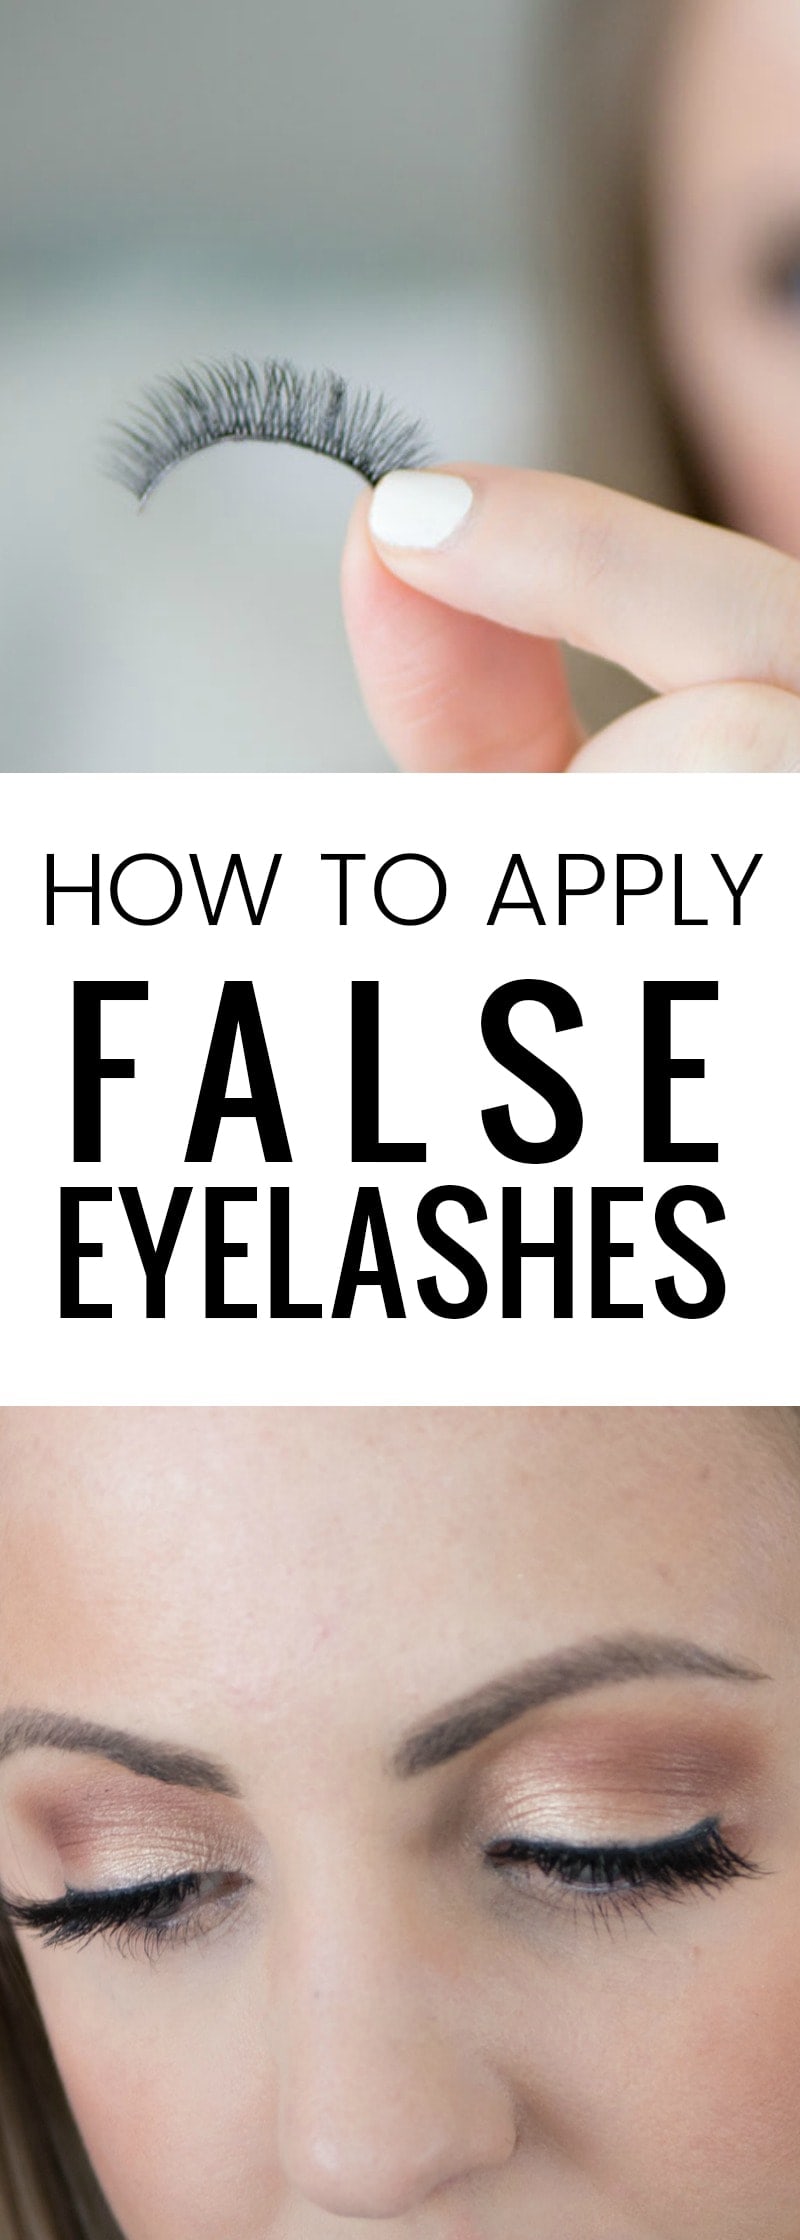 Popular Houston Beauty Blogger Meg O on the Go shares How to apply false eyelashes - going over my best tips and tricks on how to getting it perfect every time! It's much easier than you think!